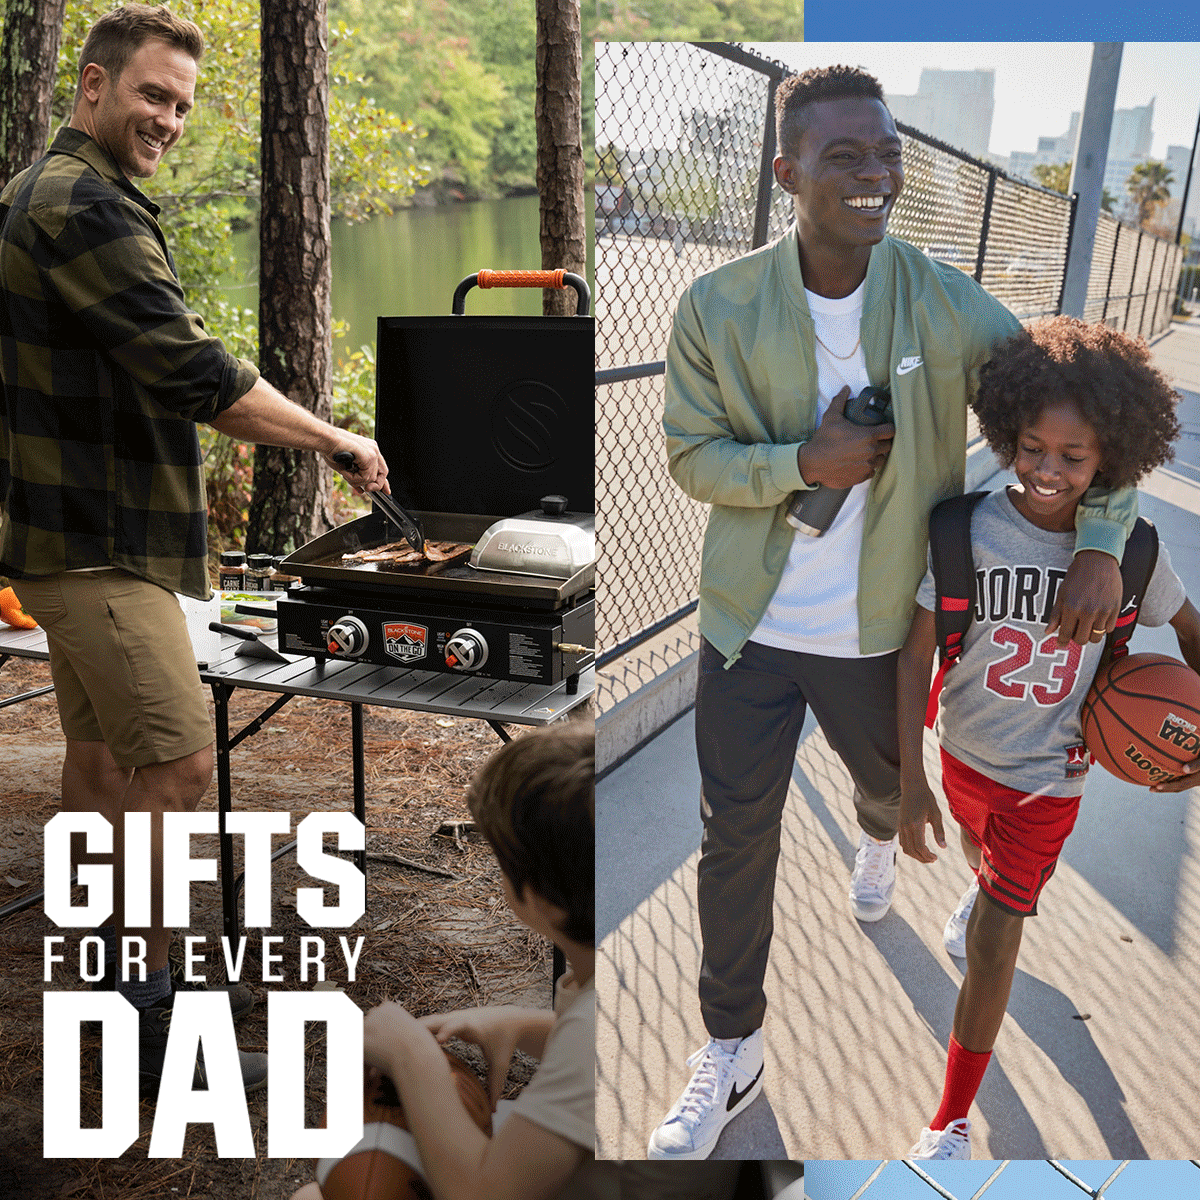 Gifts for every dad.